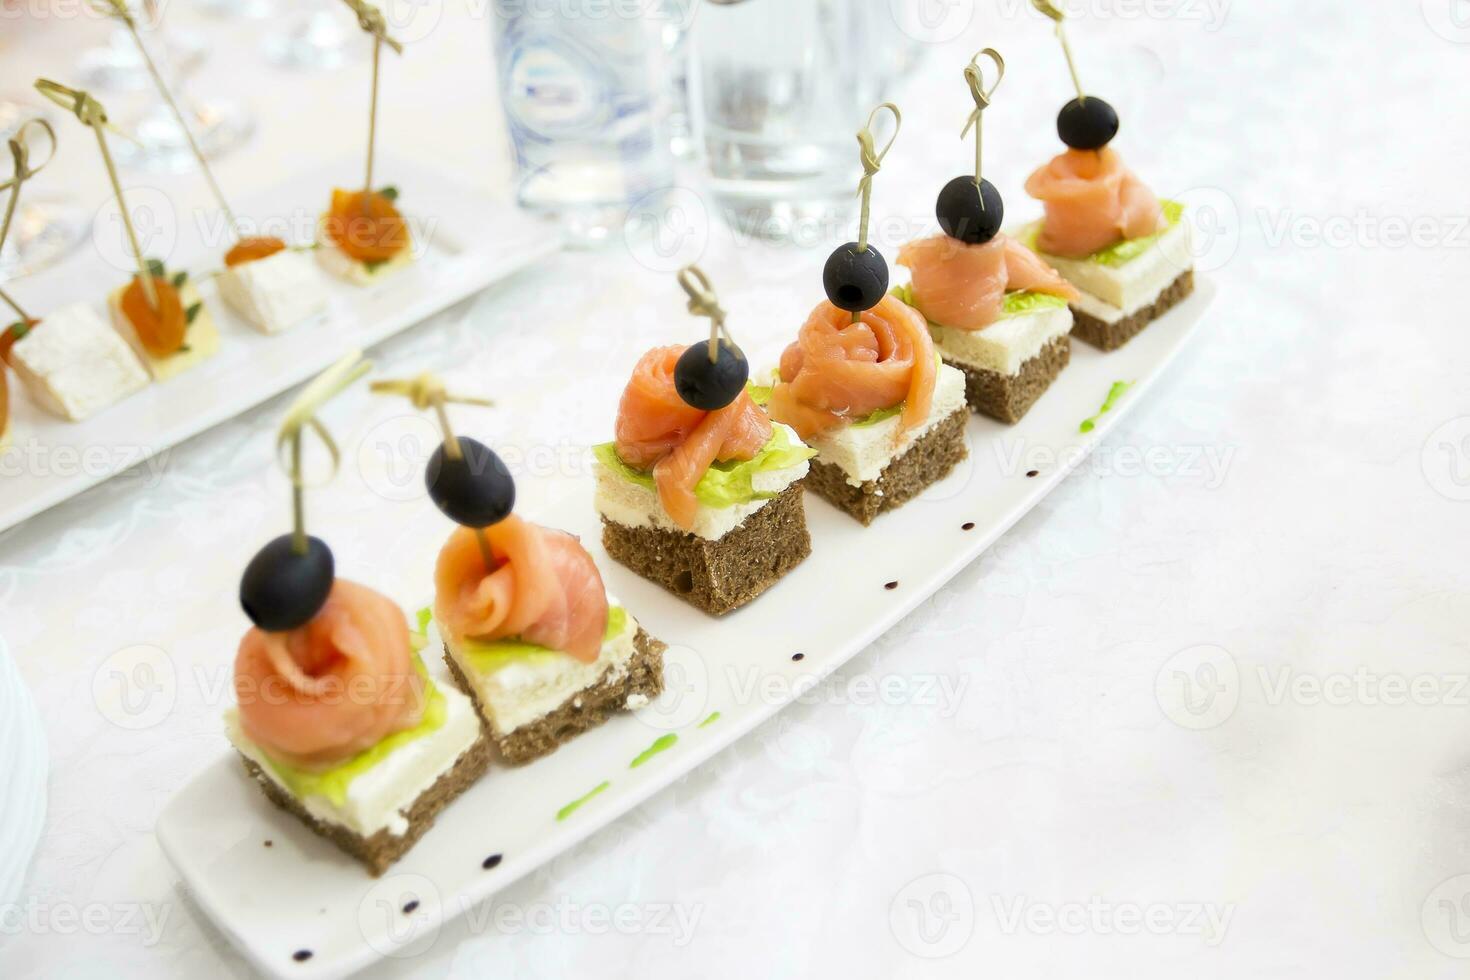 Buffet dishes.Canapes on a white plate. Small sandwiches on a stick. Snack of black bread, salmon and salad photo